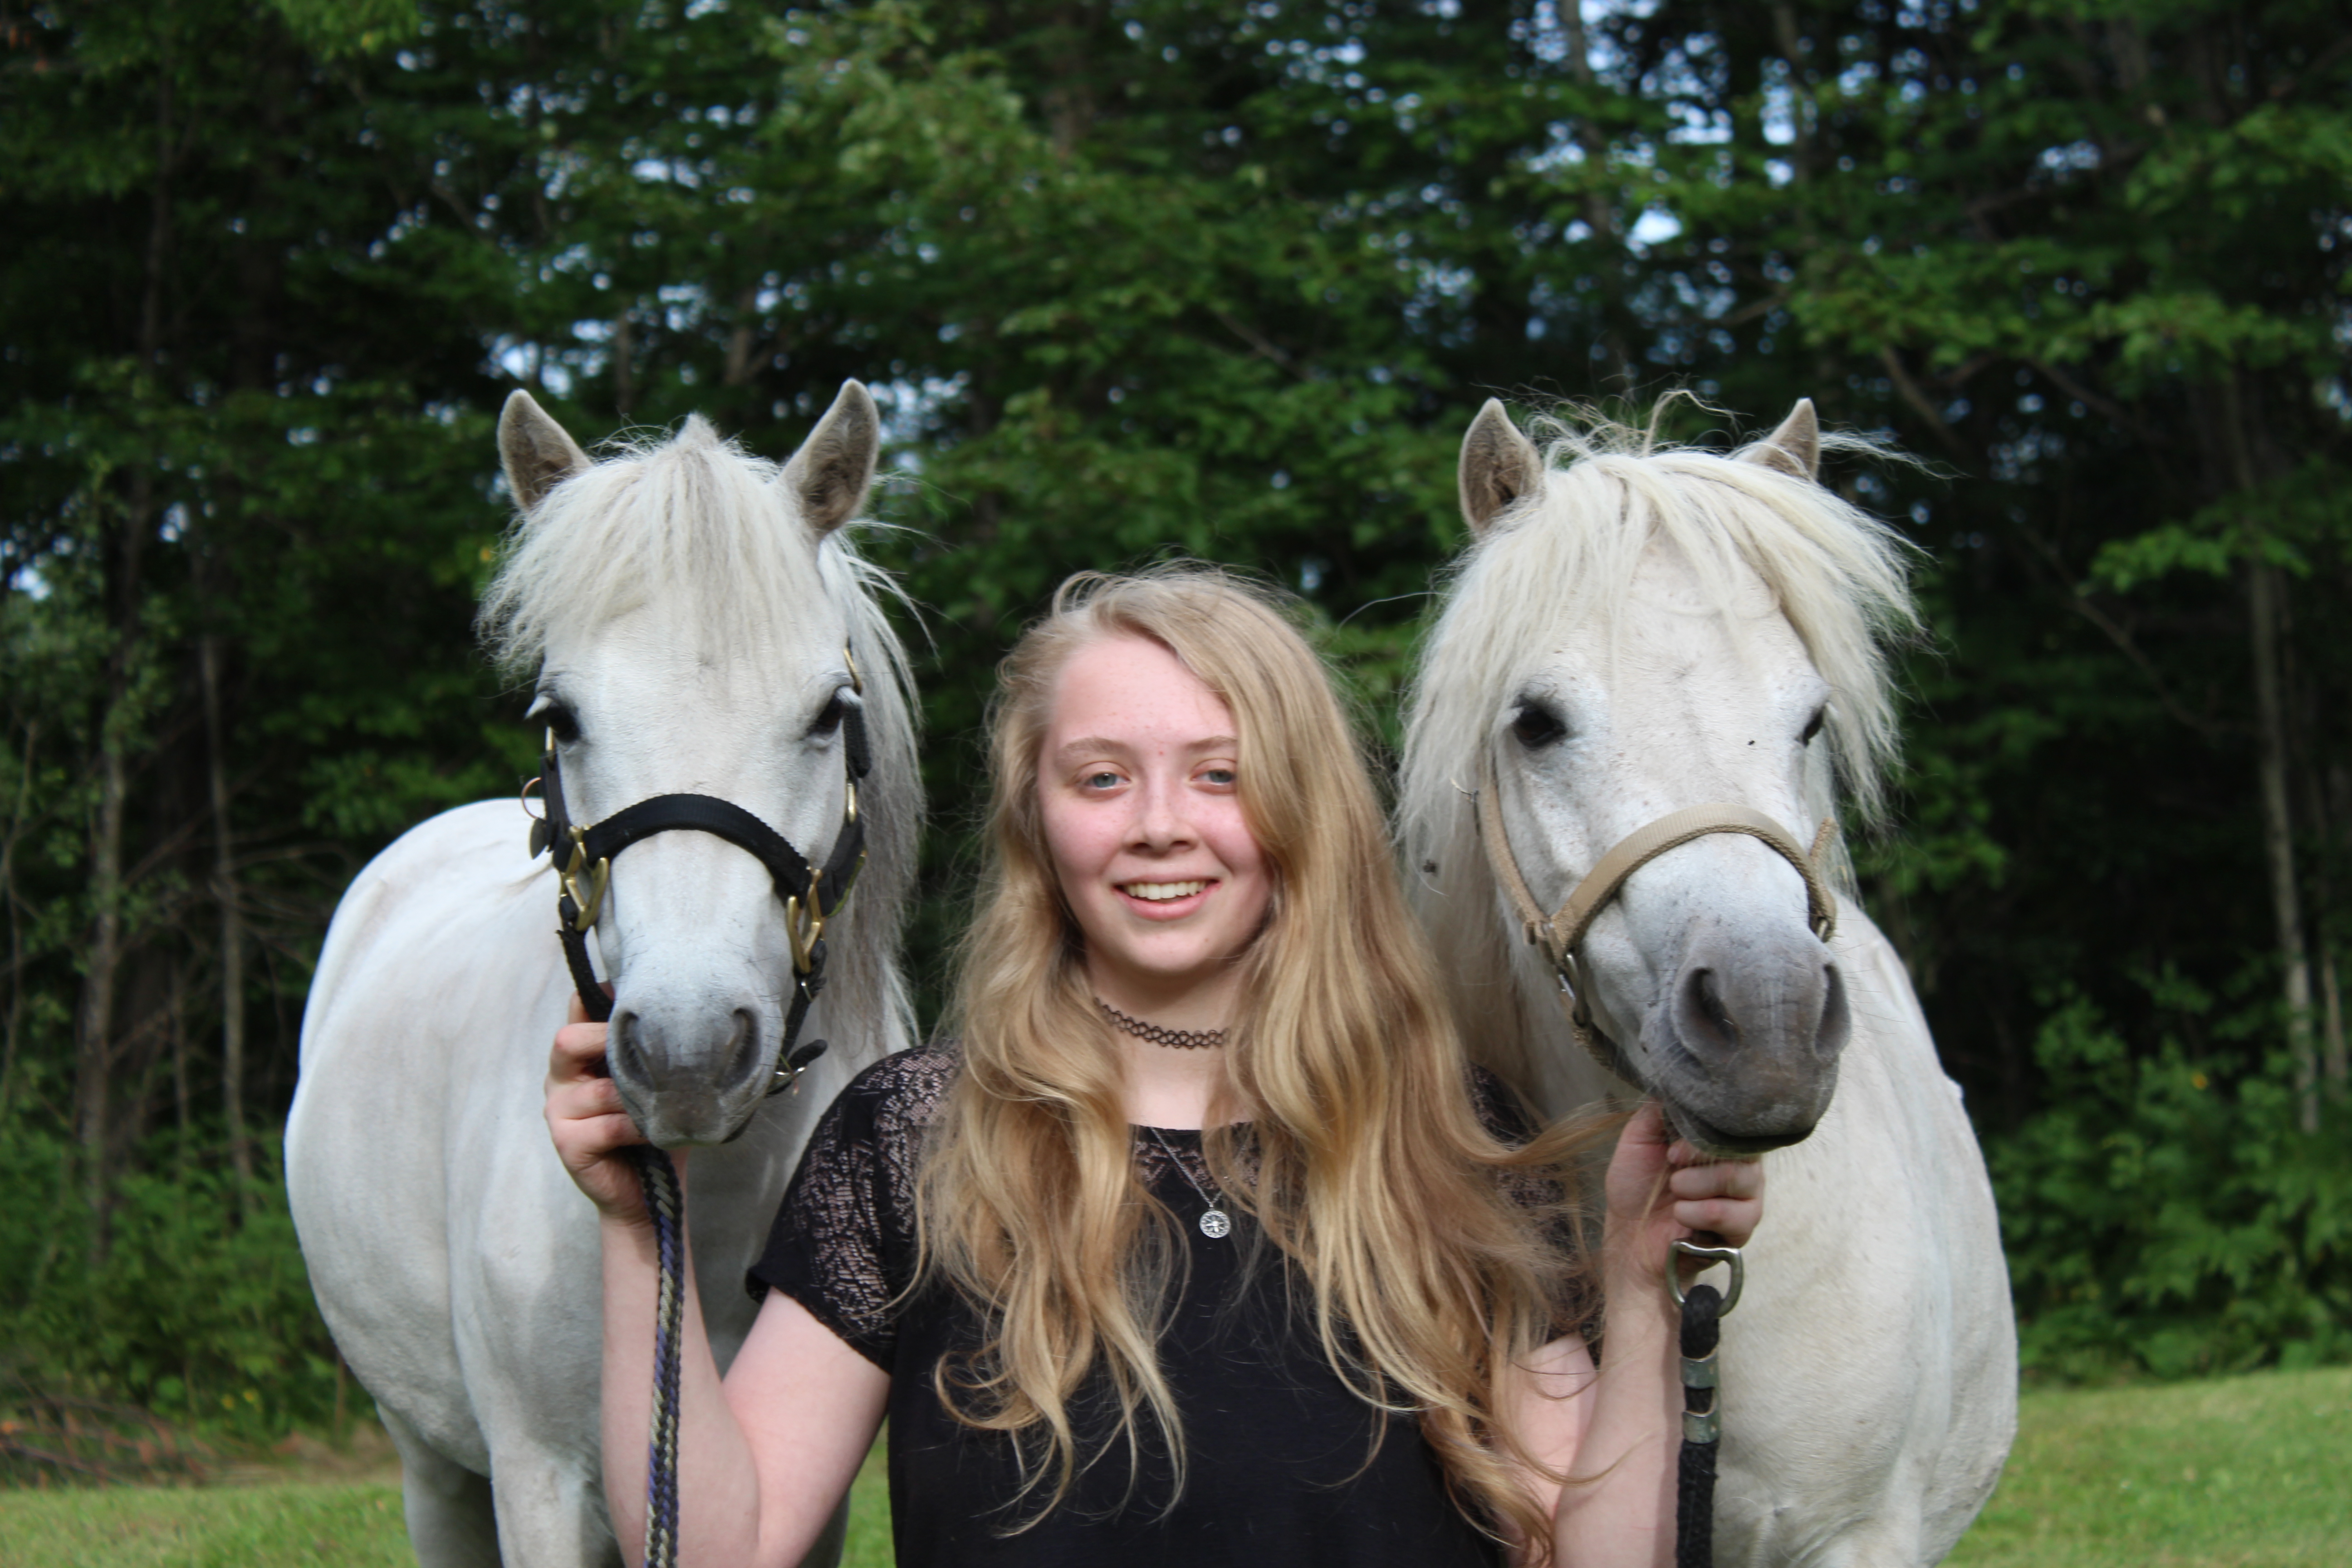 Makenzie with her horses.